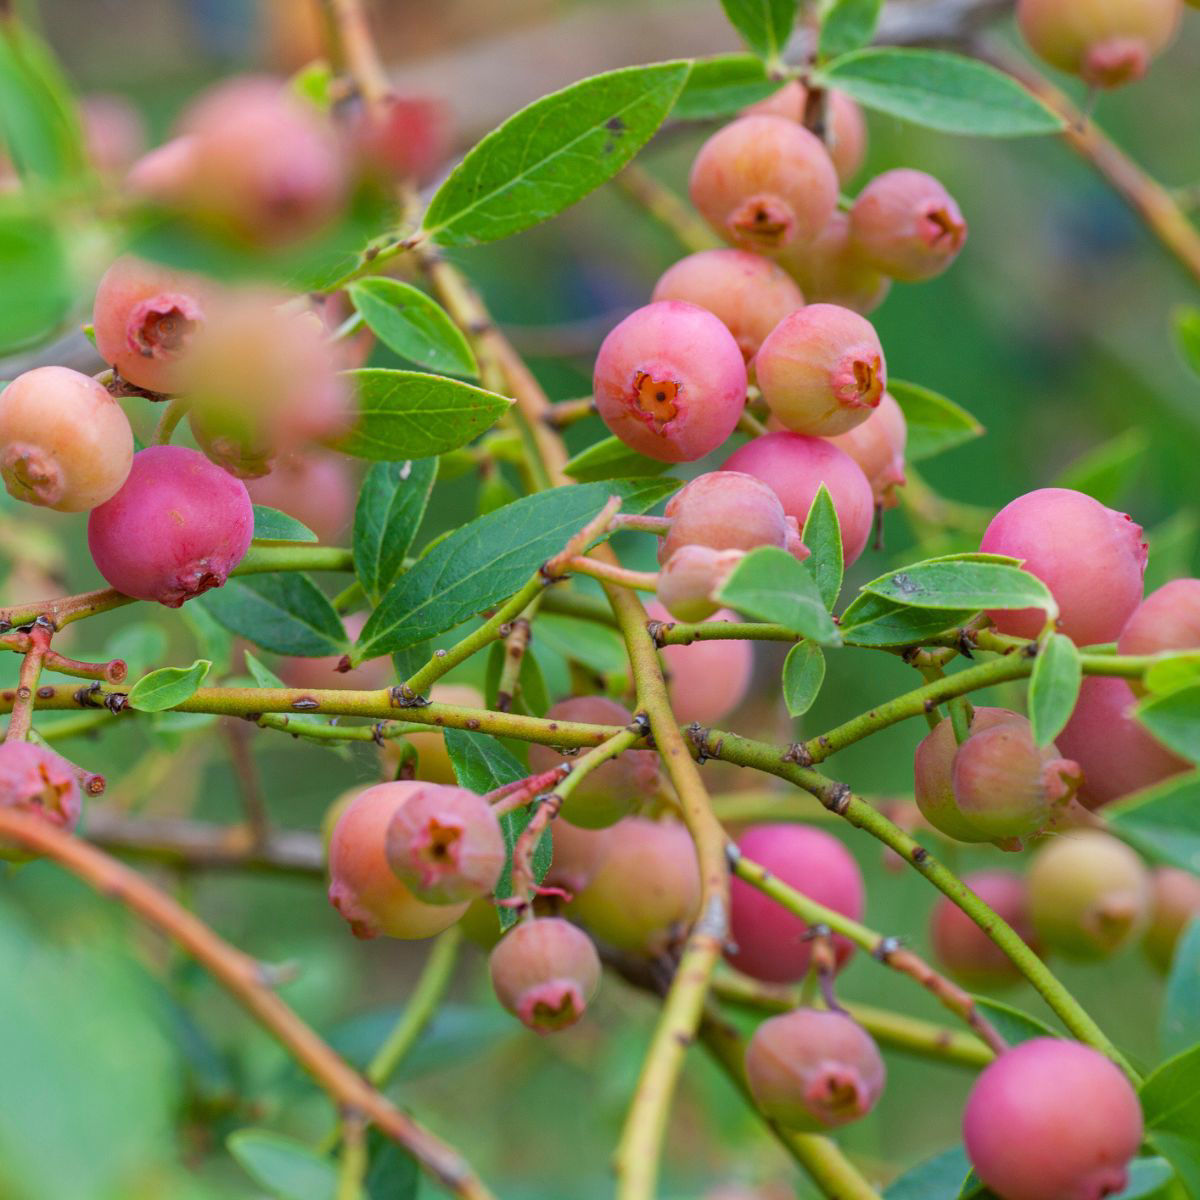 Pink Lemonade Blueberry Bushes for Sale at Arbor Day's Online Tree